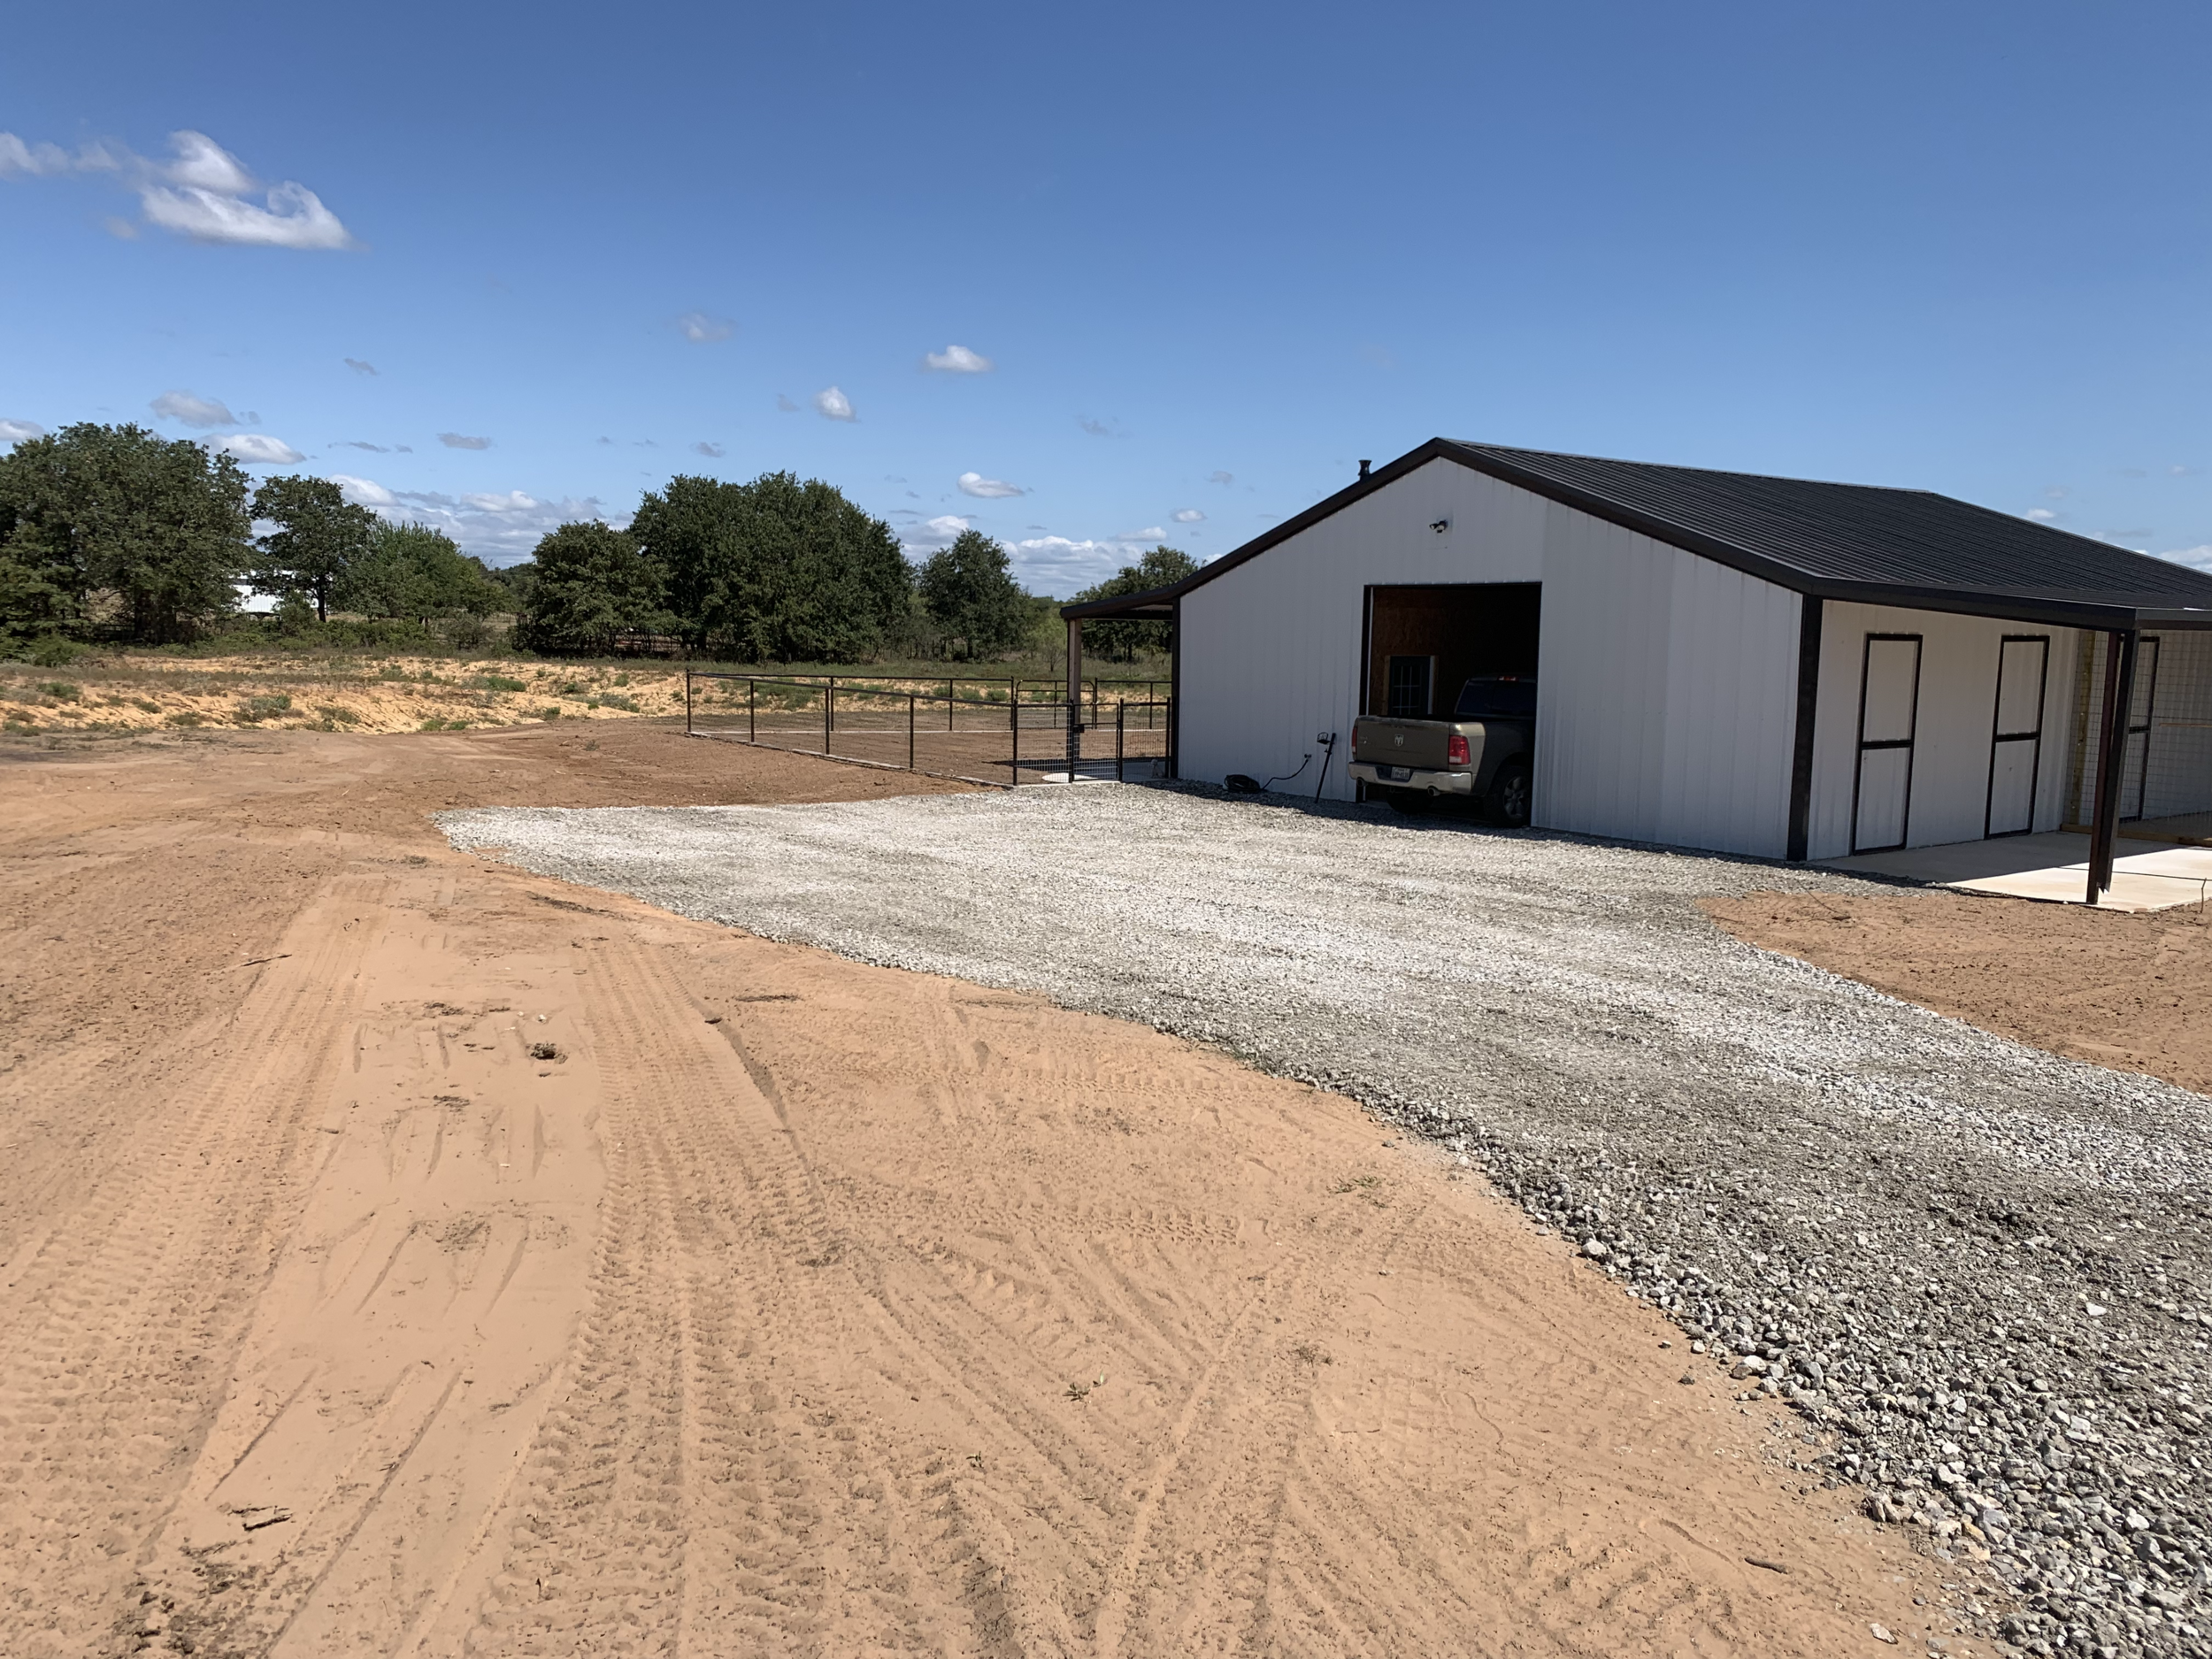 Dirt and Gravel Work For Garage